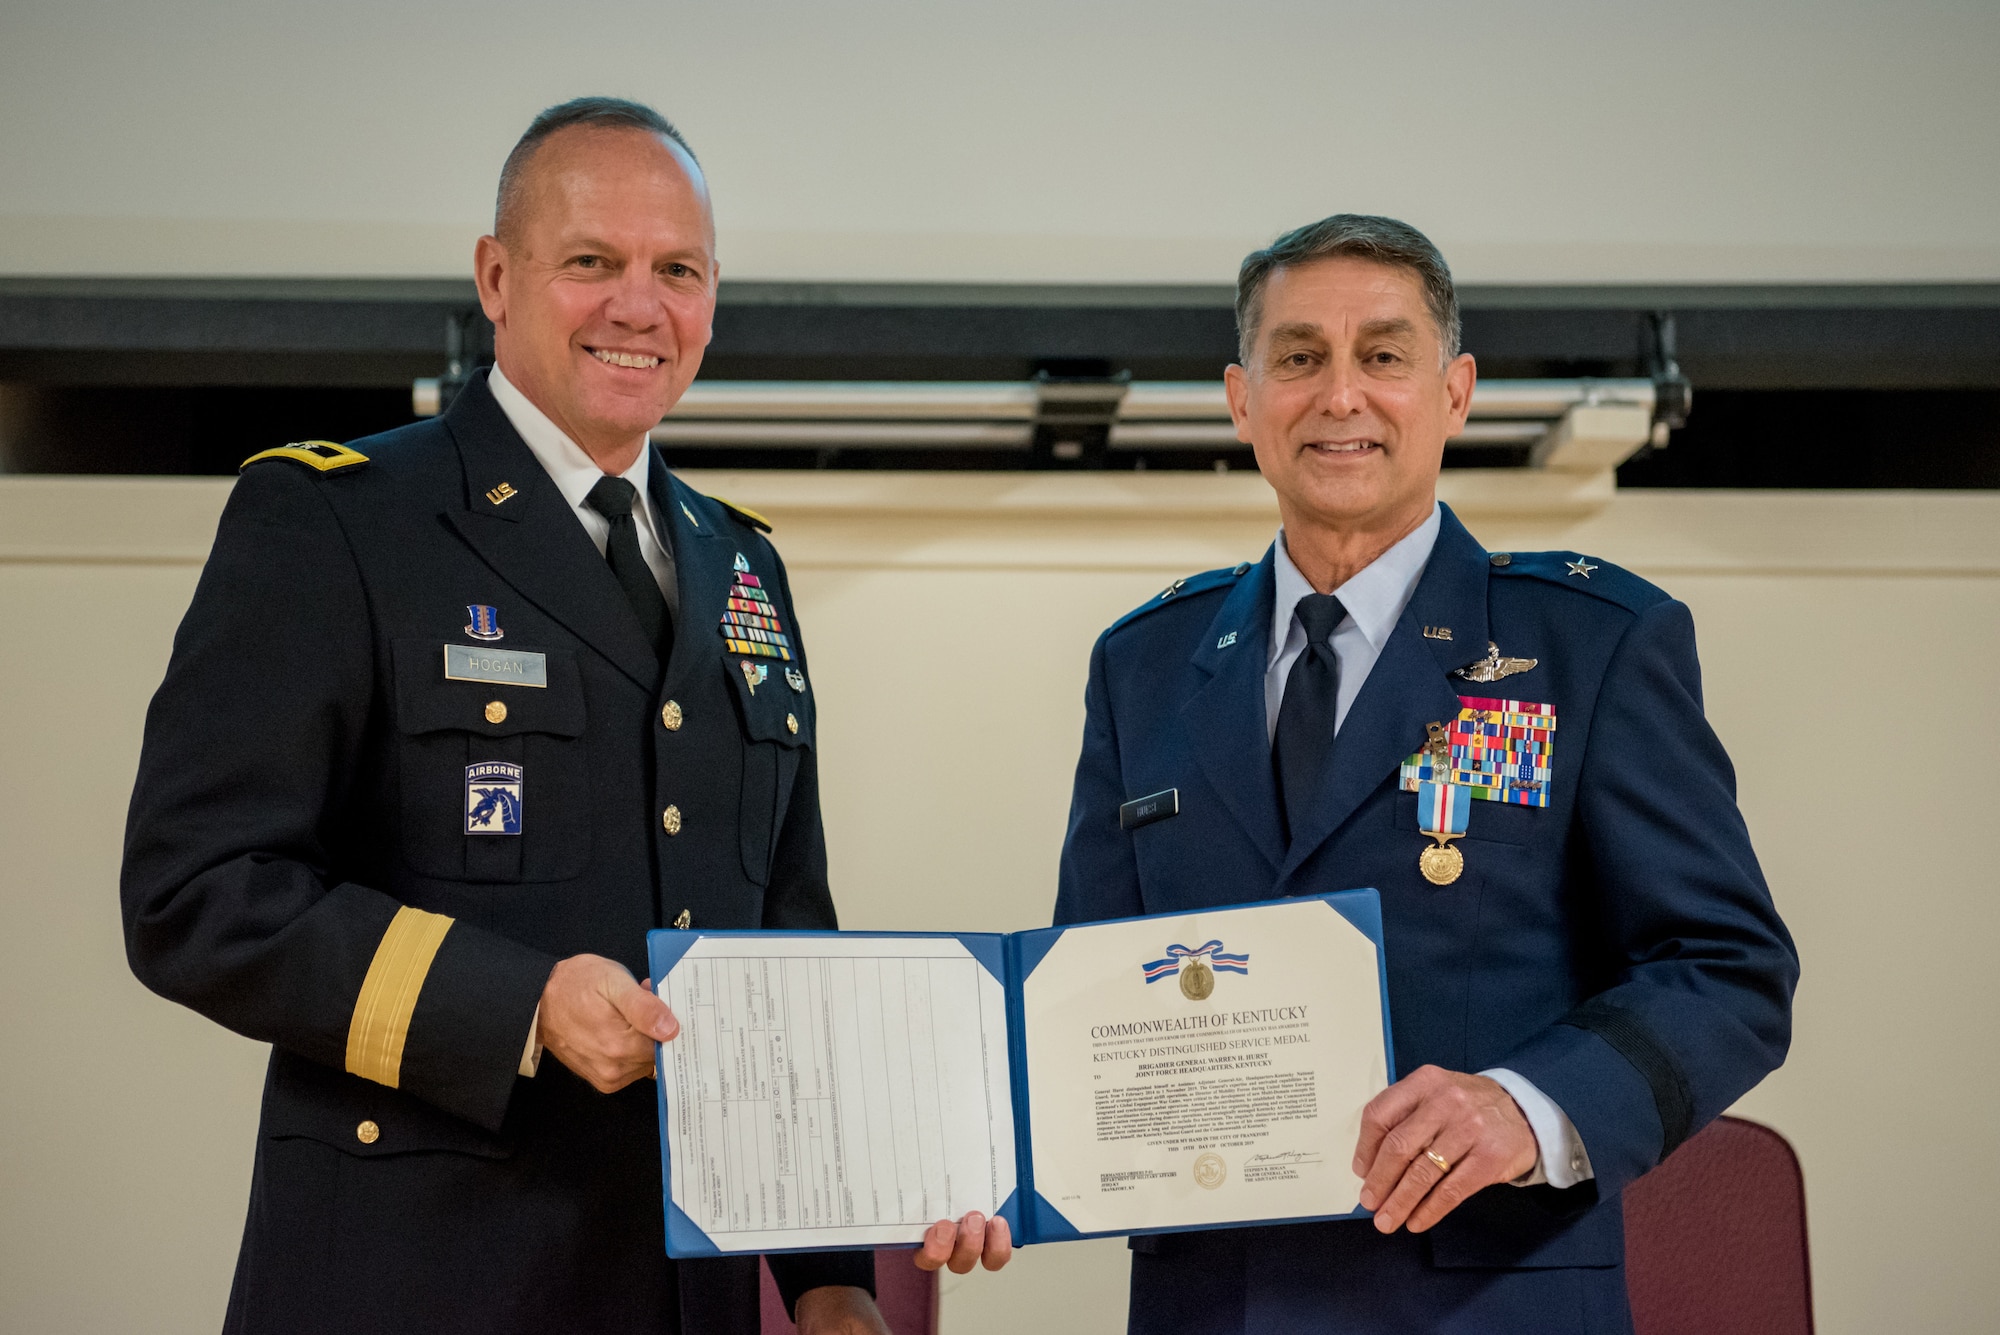 Brig. Gen. Warren Hurst (right), Kentucky’s outgoing assistant adjutant general for Air, receives the Kentucky Distinguished Service Medal from Army Maj. Gen. Stephen Hogan, Kentucky’s adjutant general, during Hurst’s retirement ceremony at the Kentucky Air National Guard Base in Louisville, Ky., Nov. 16, 2019. Hurst is retiring after more than 34 years of service to the active-duty Air Force and Kentucky Air National Guard. (U.S. Air National Guard photo by Staff Sgt. Joshua Horton)